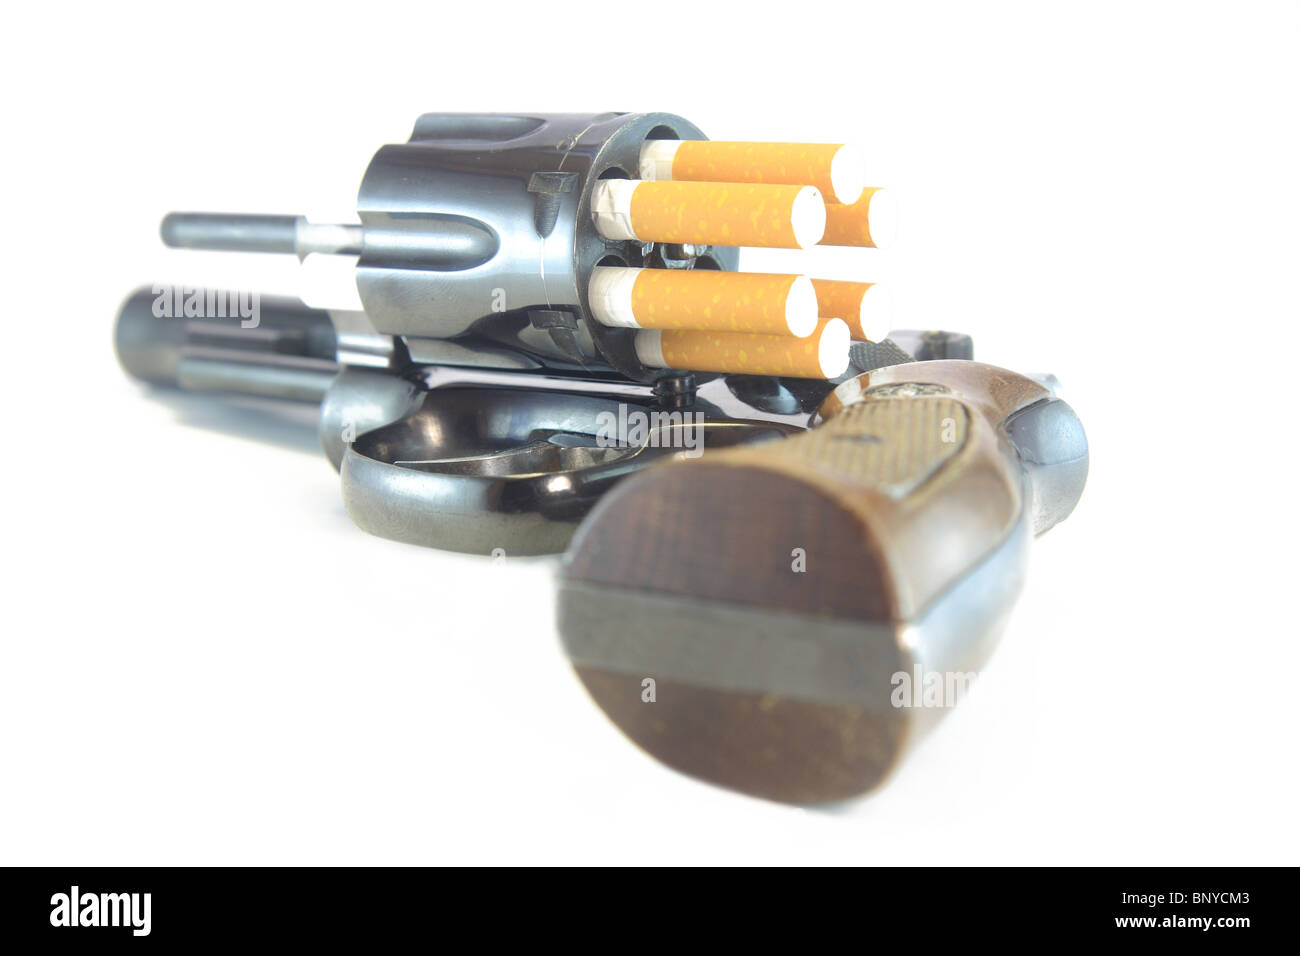 Revolver loaded with cigarettes to symbolize the dangers of smoking Stock Photo